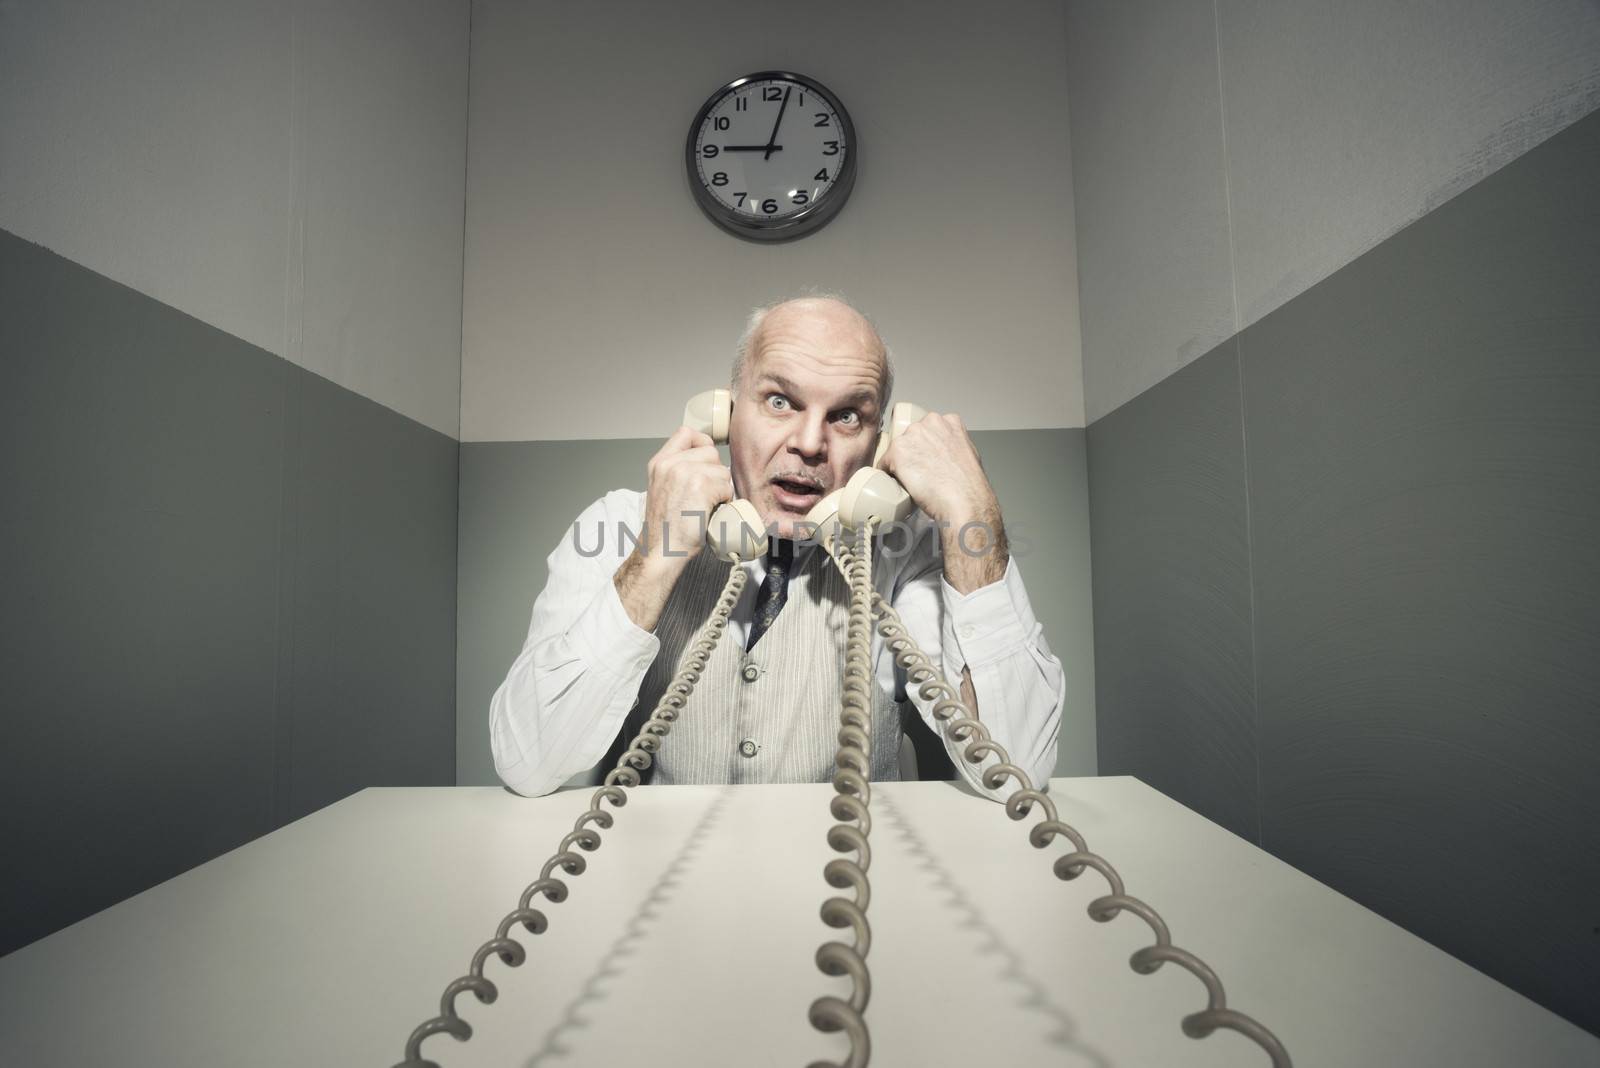 Stressed overworked businessman talking on the phone, vintage setting.